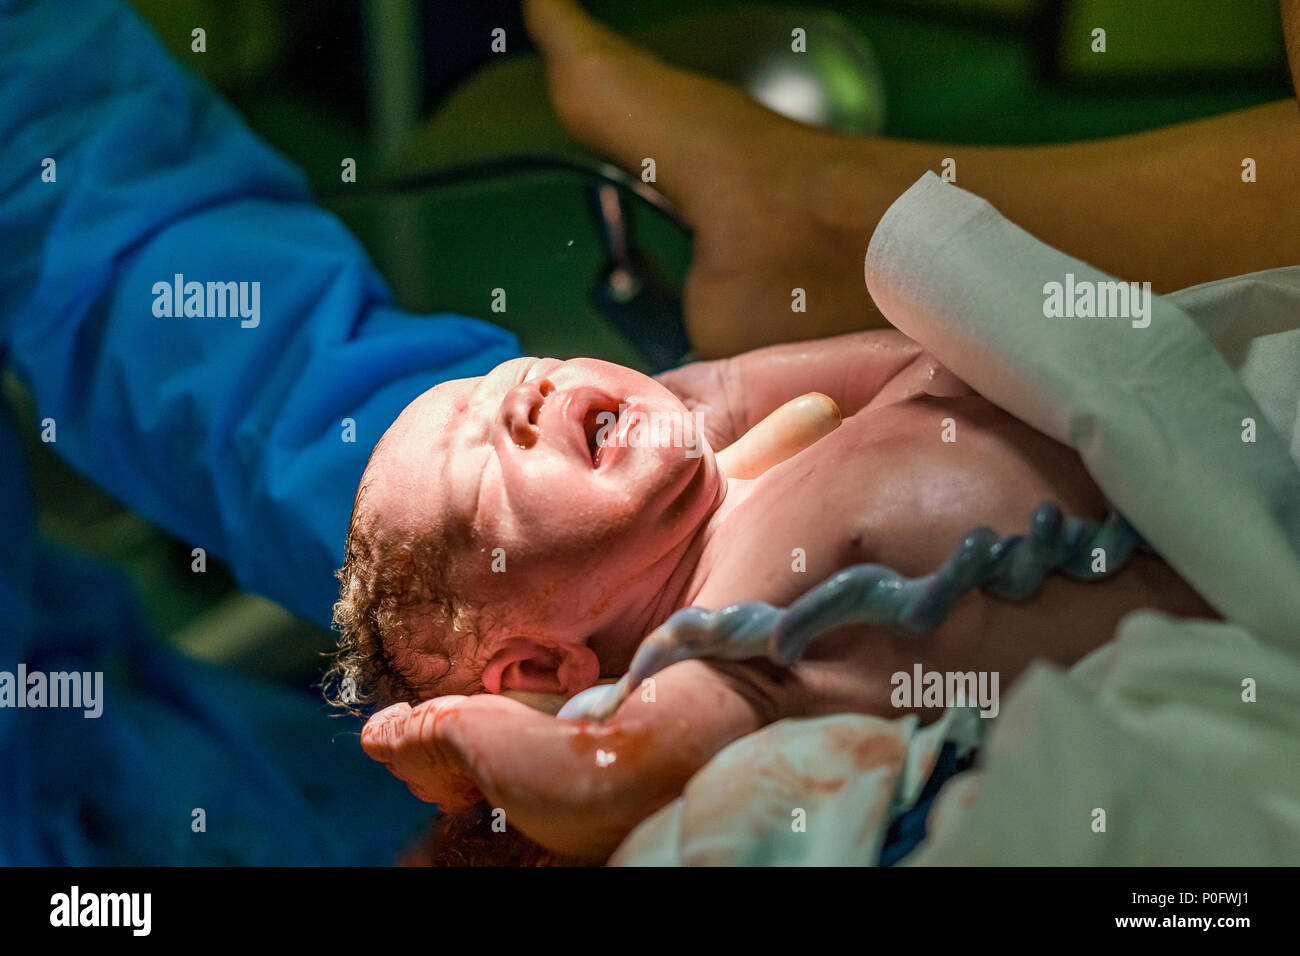 New born baby boy with umbilical cord assisted by midwife Stock Photo